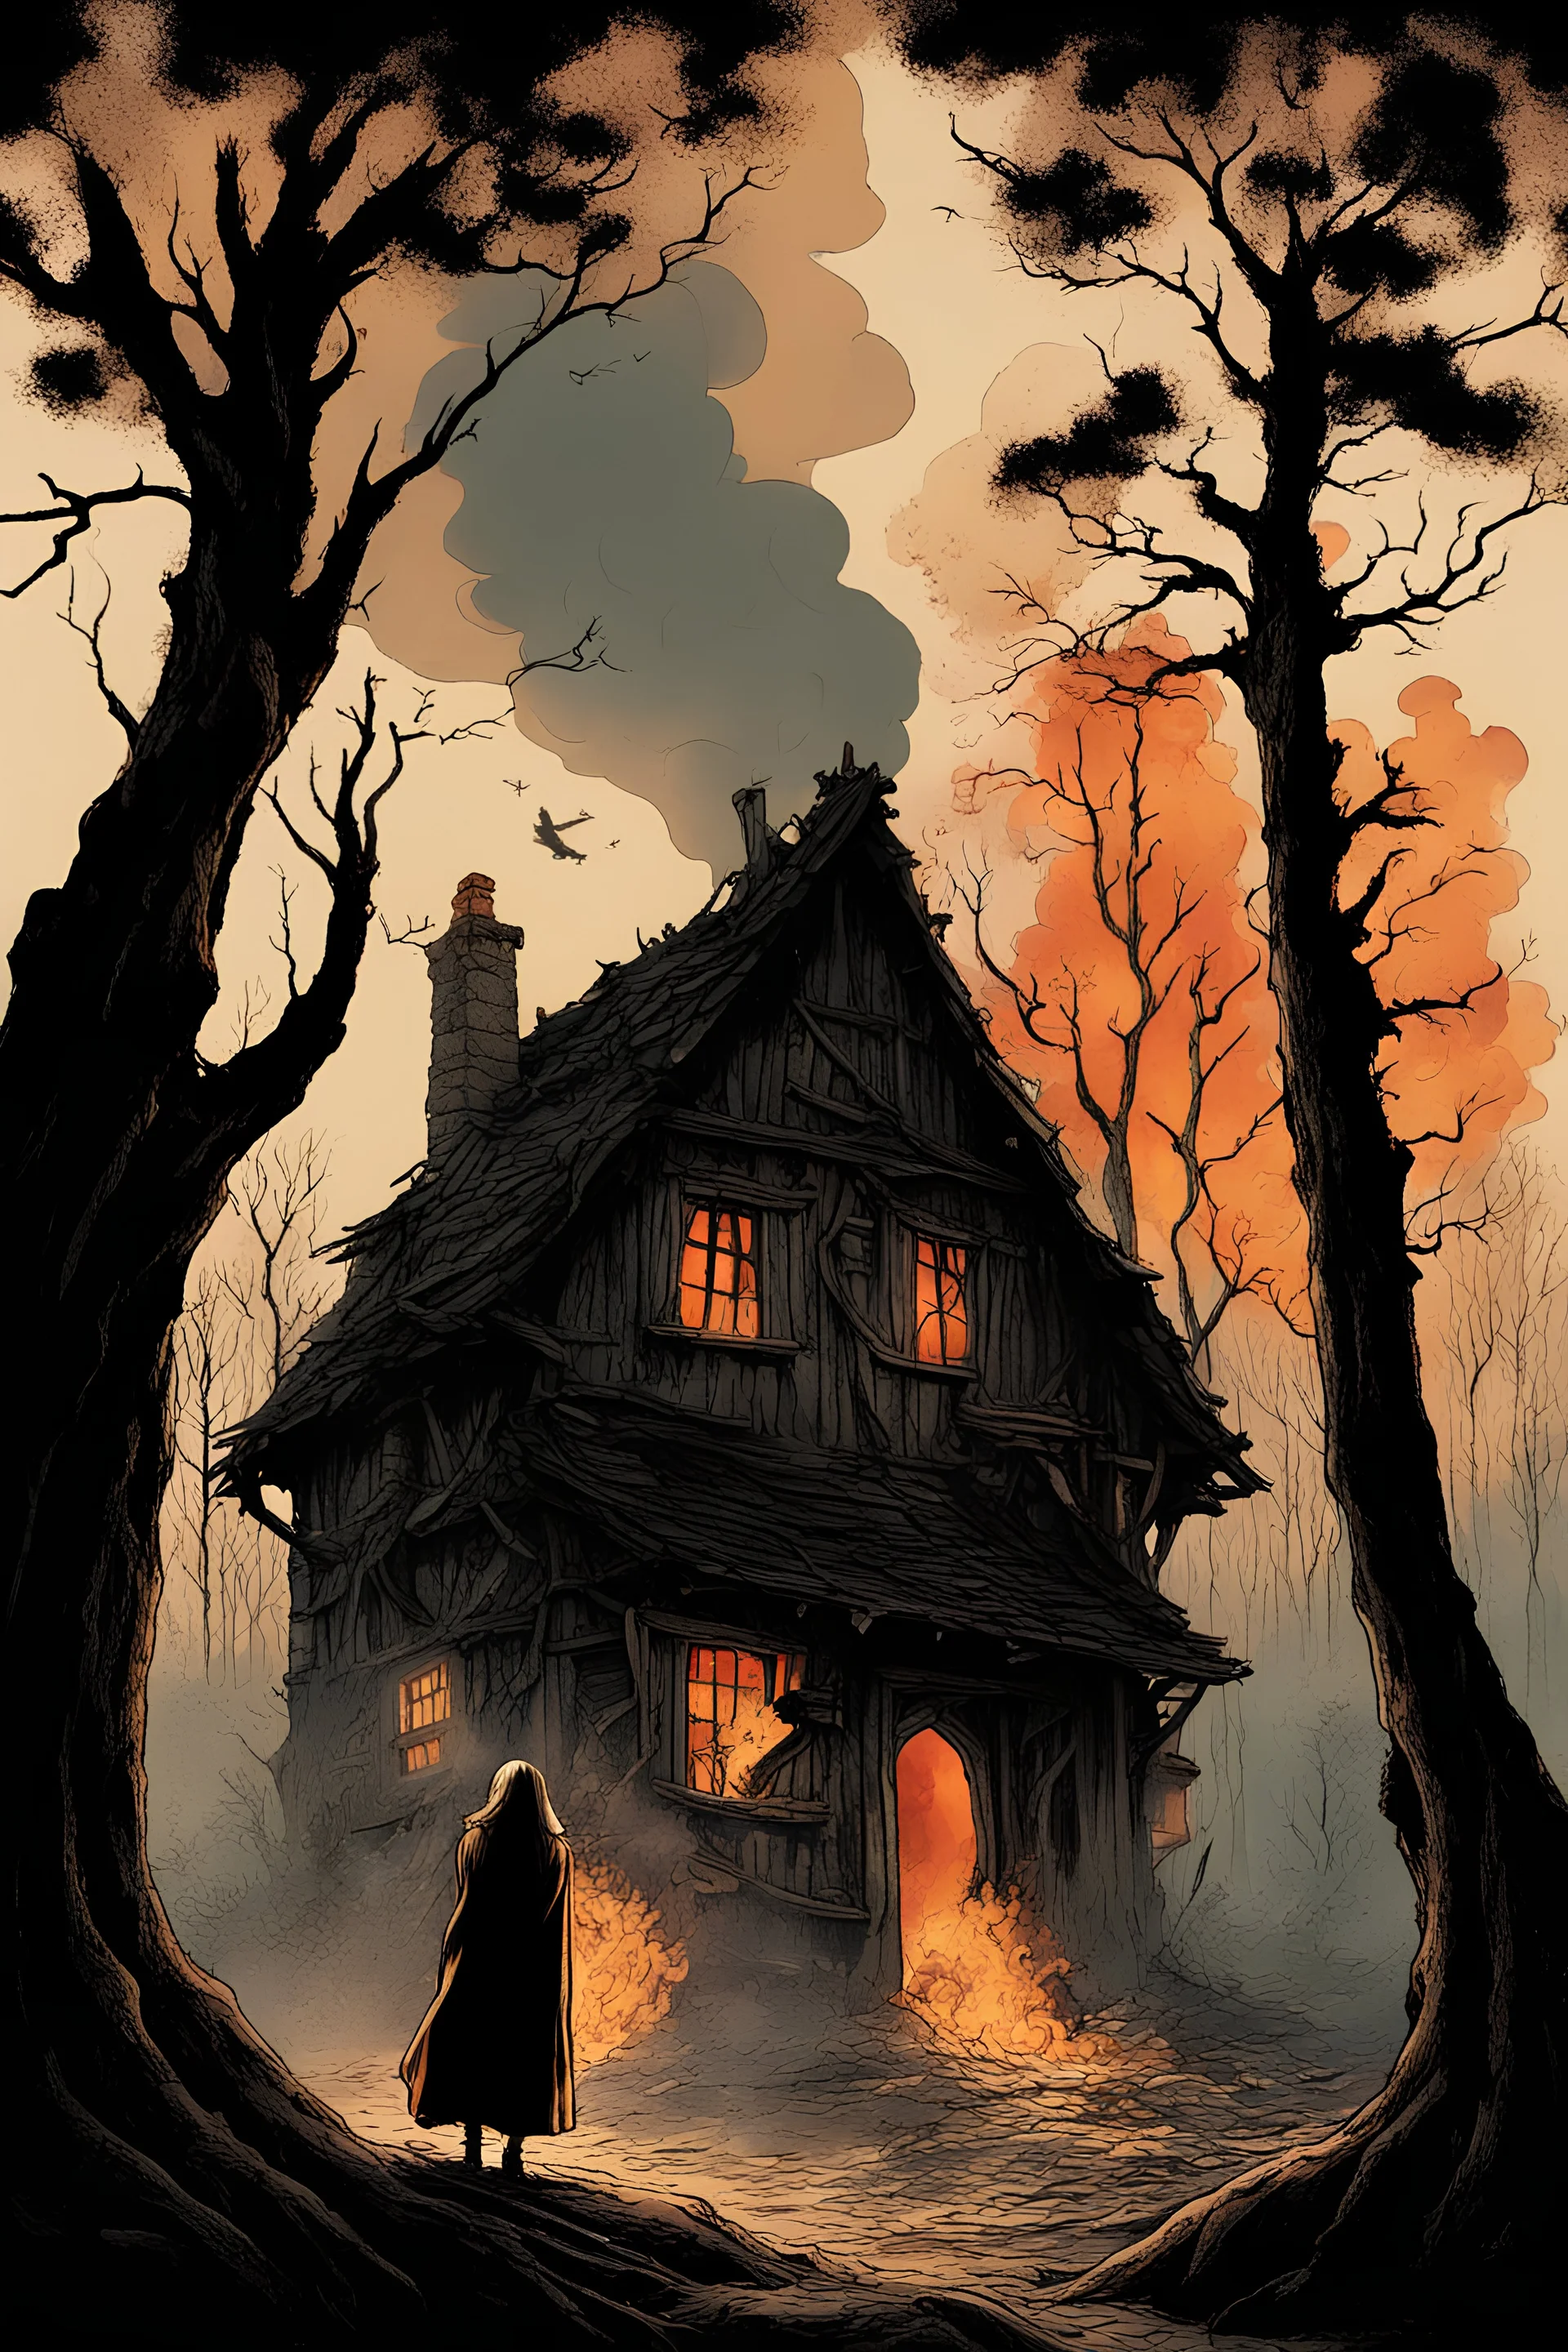 In the heart of a dense, ancient forest, a medieval cottage stands engulfed in flames, its timeworn timbers crackling and sending plumes of smoke into the sky. In the foreground, a mysterious woman in silhouette stands, the house is melting like candy. the house is engulfed in flames. a woman in a cloak hides behind a tree.